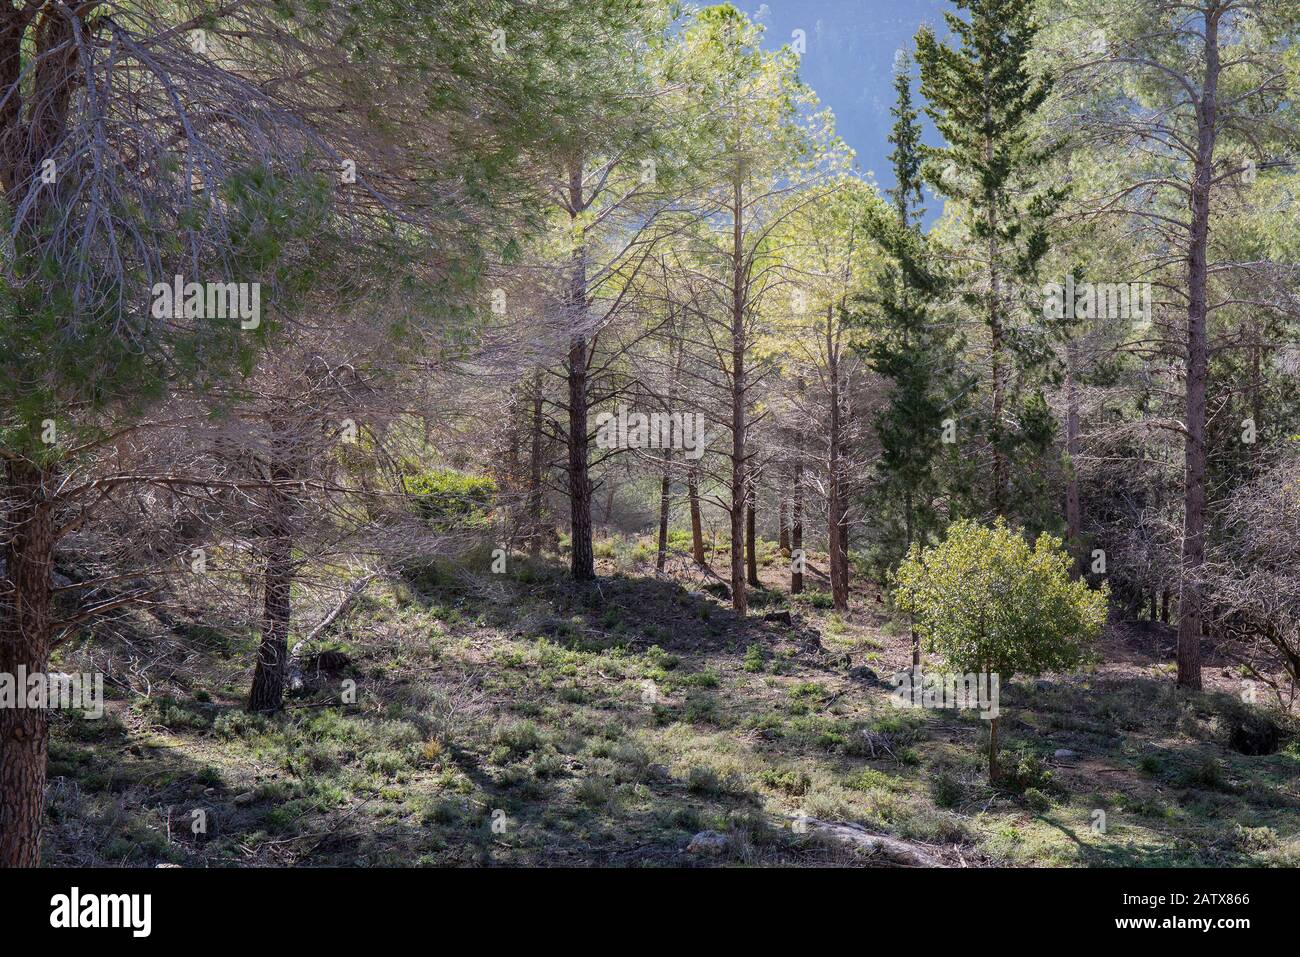 A forest scenery in the Judea mountains, near Jerusalem, Israel, at dawn. Stock Photo